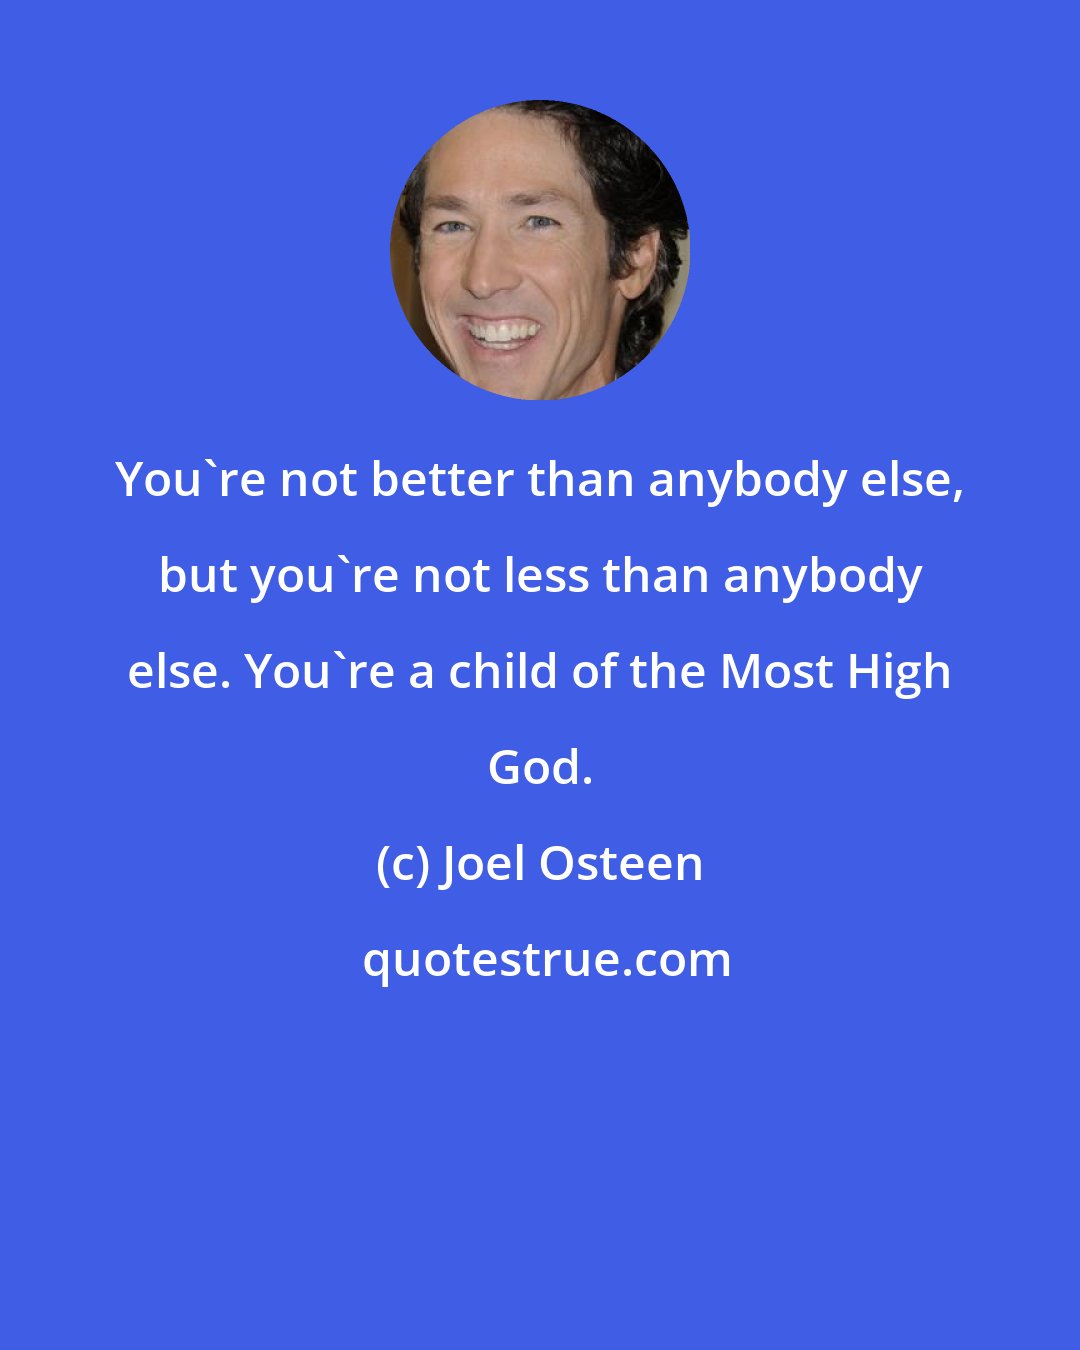 Joel Osteen: You're not better than anybody else, but you're not less than anybody else. You're a child of the Most High God.